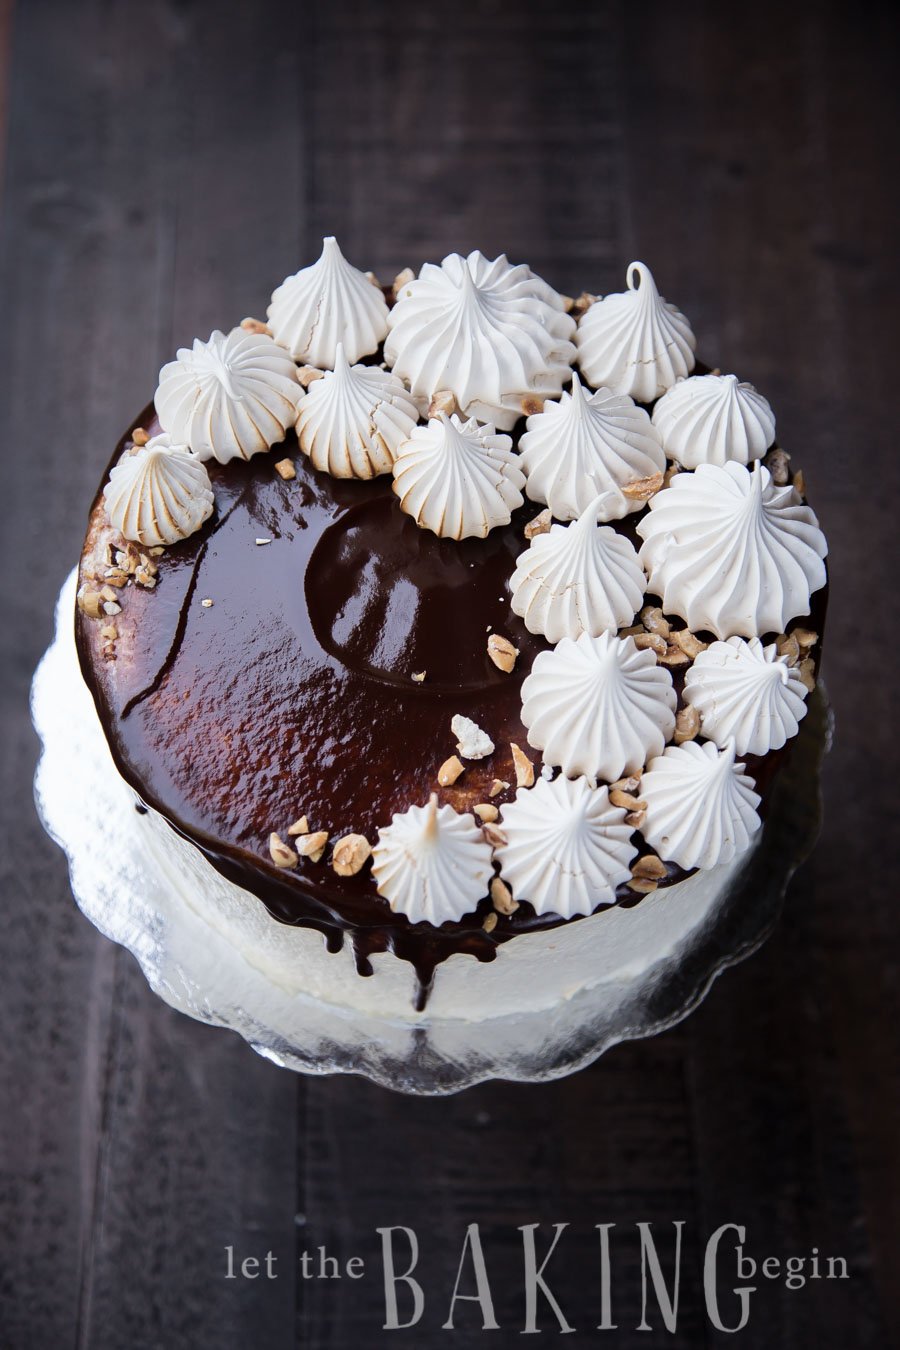 Kiev cake on a platter topped with chocolate, half meringues, and hazelnut.